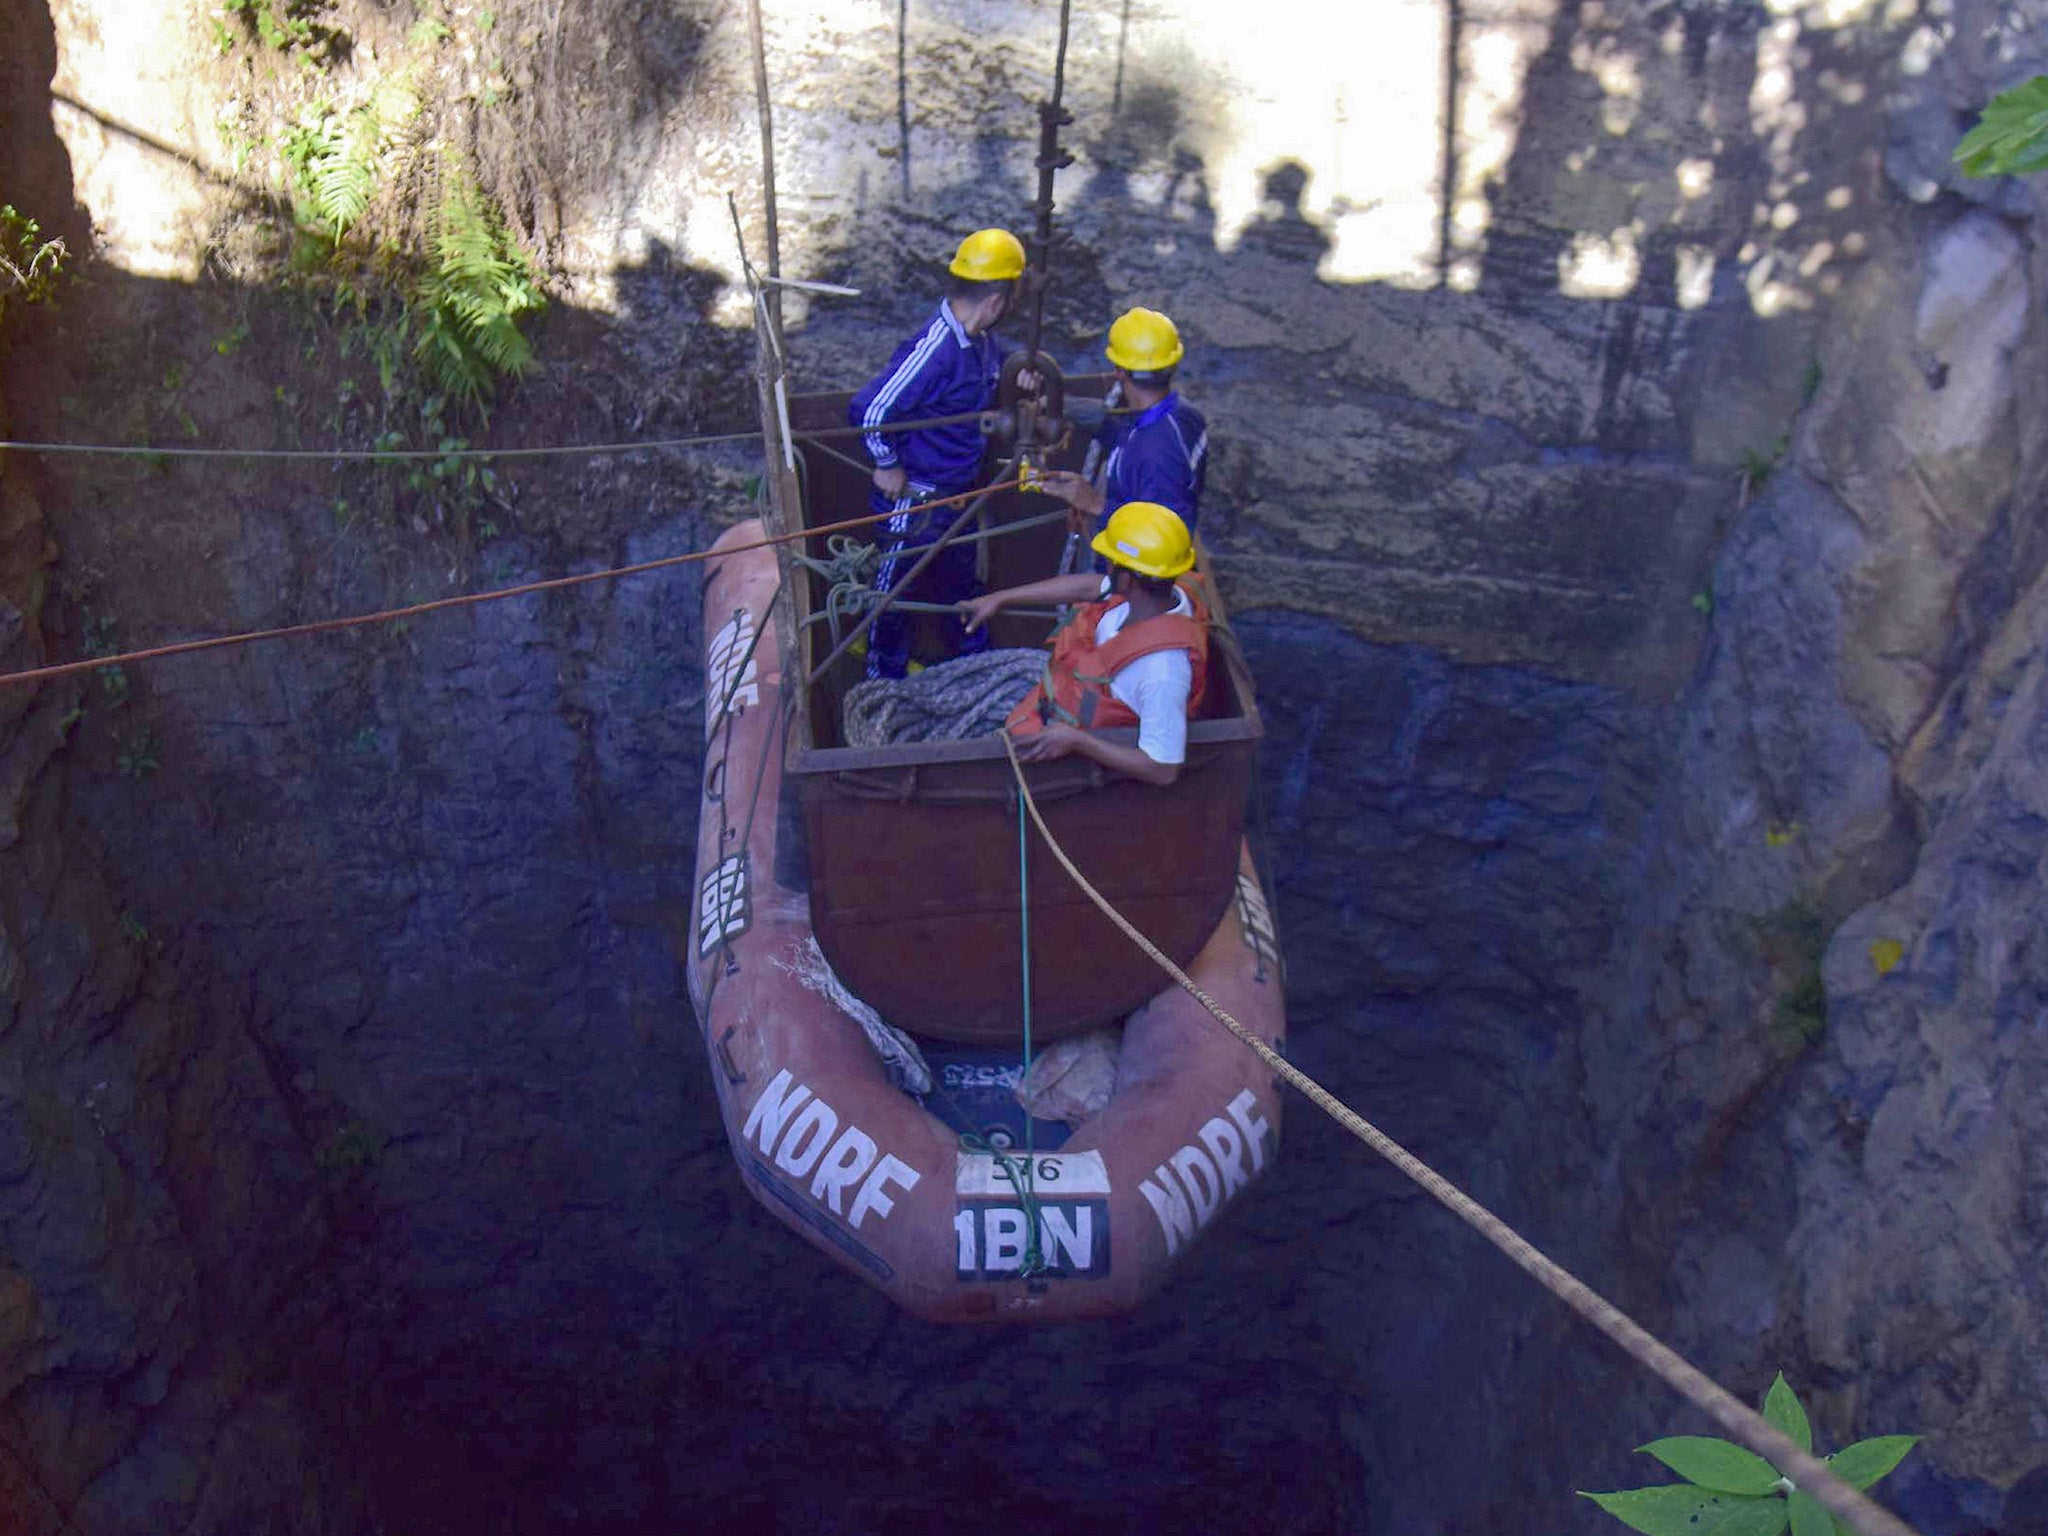 Indian Navy divers are lowered into the illegal coal pit in Meghalaya where 15 miners have been trapped for over three weeks as part of the rescue operation